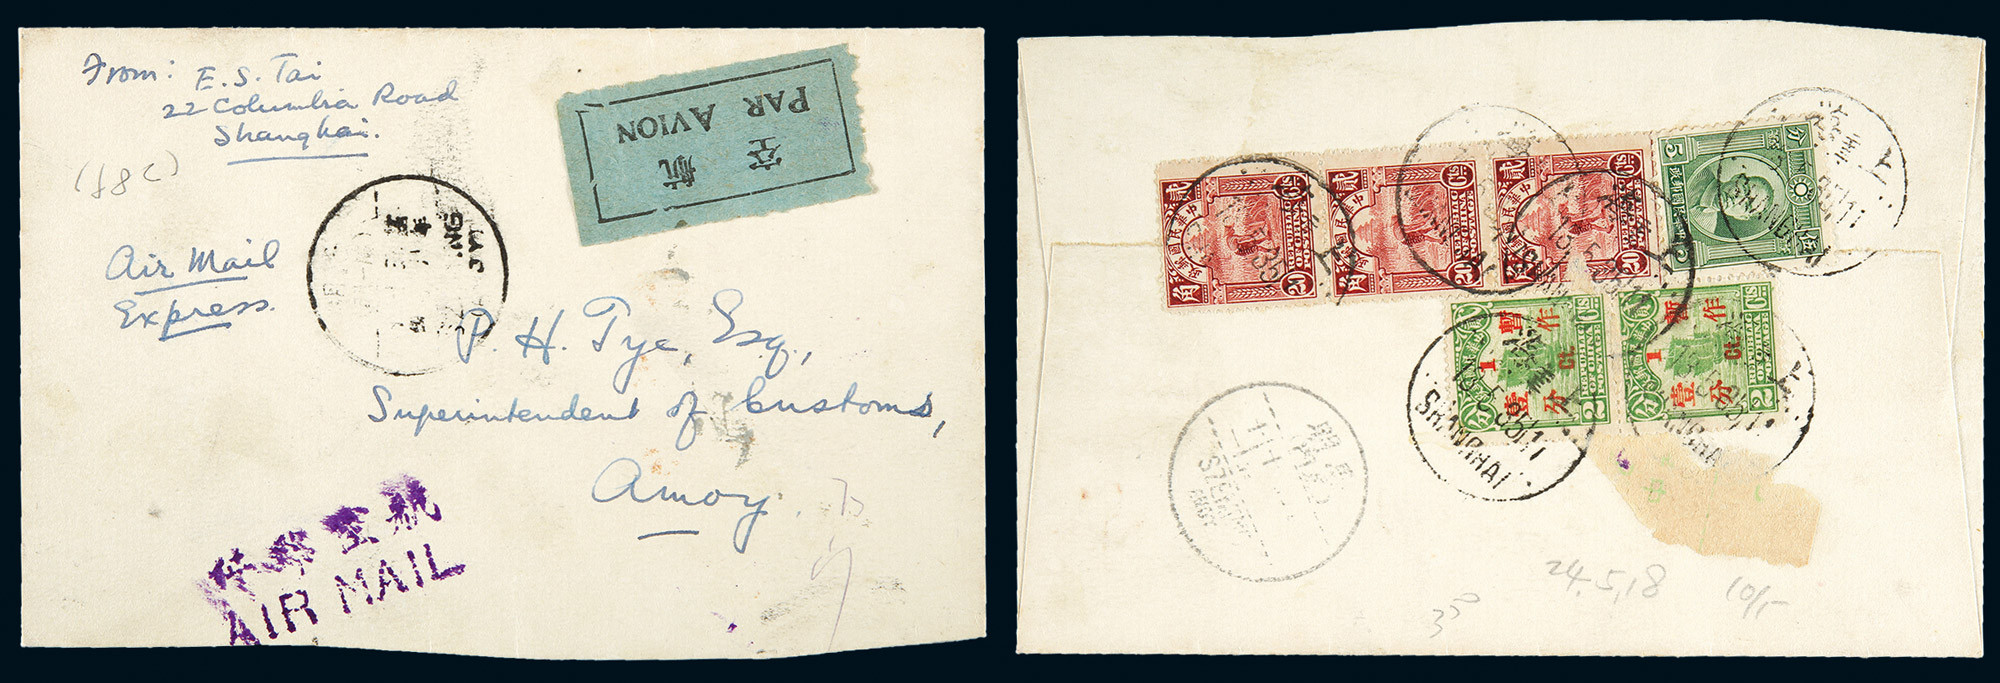 1935 Registered airmail express cover sent from Shanghai to Amoy. Nice condition